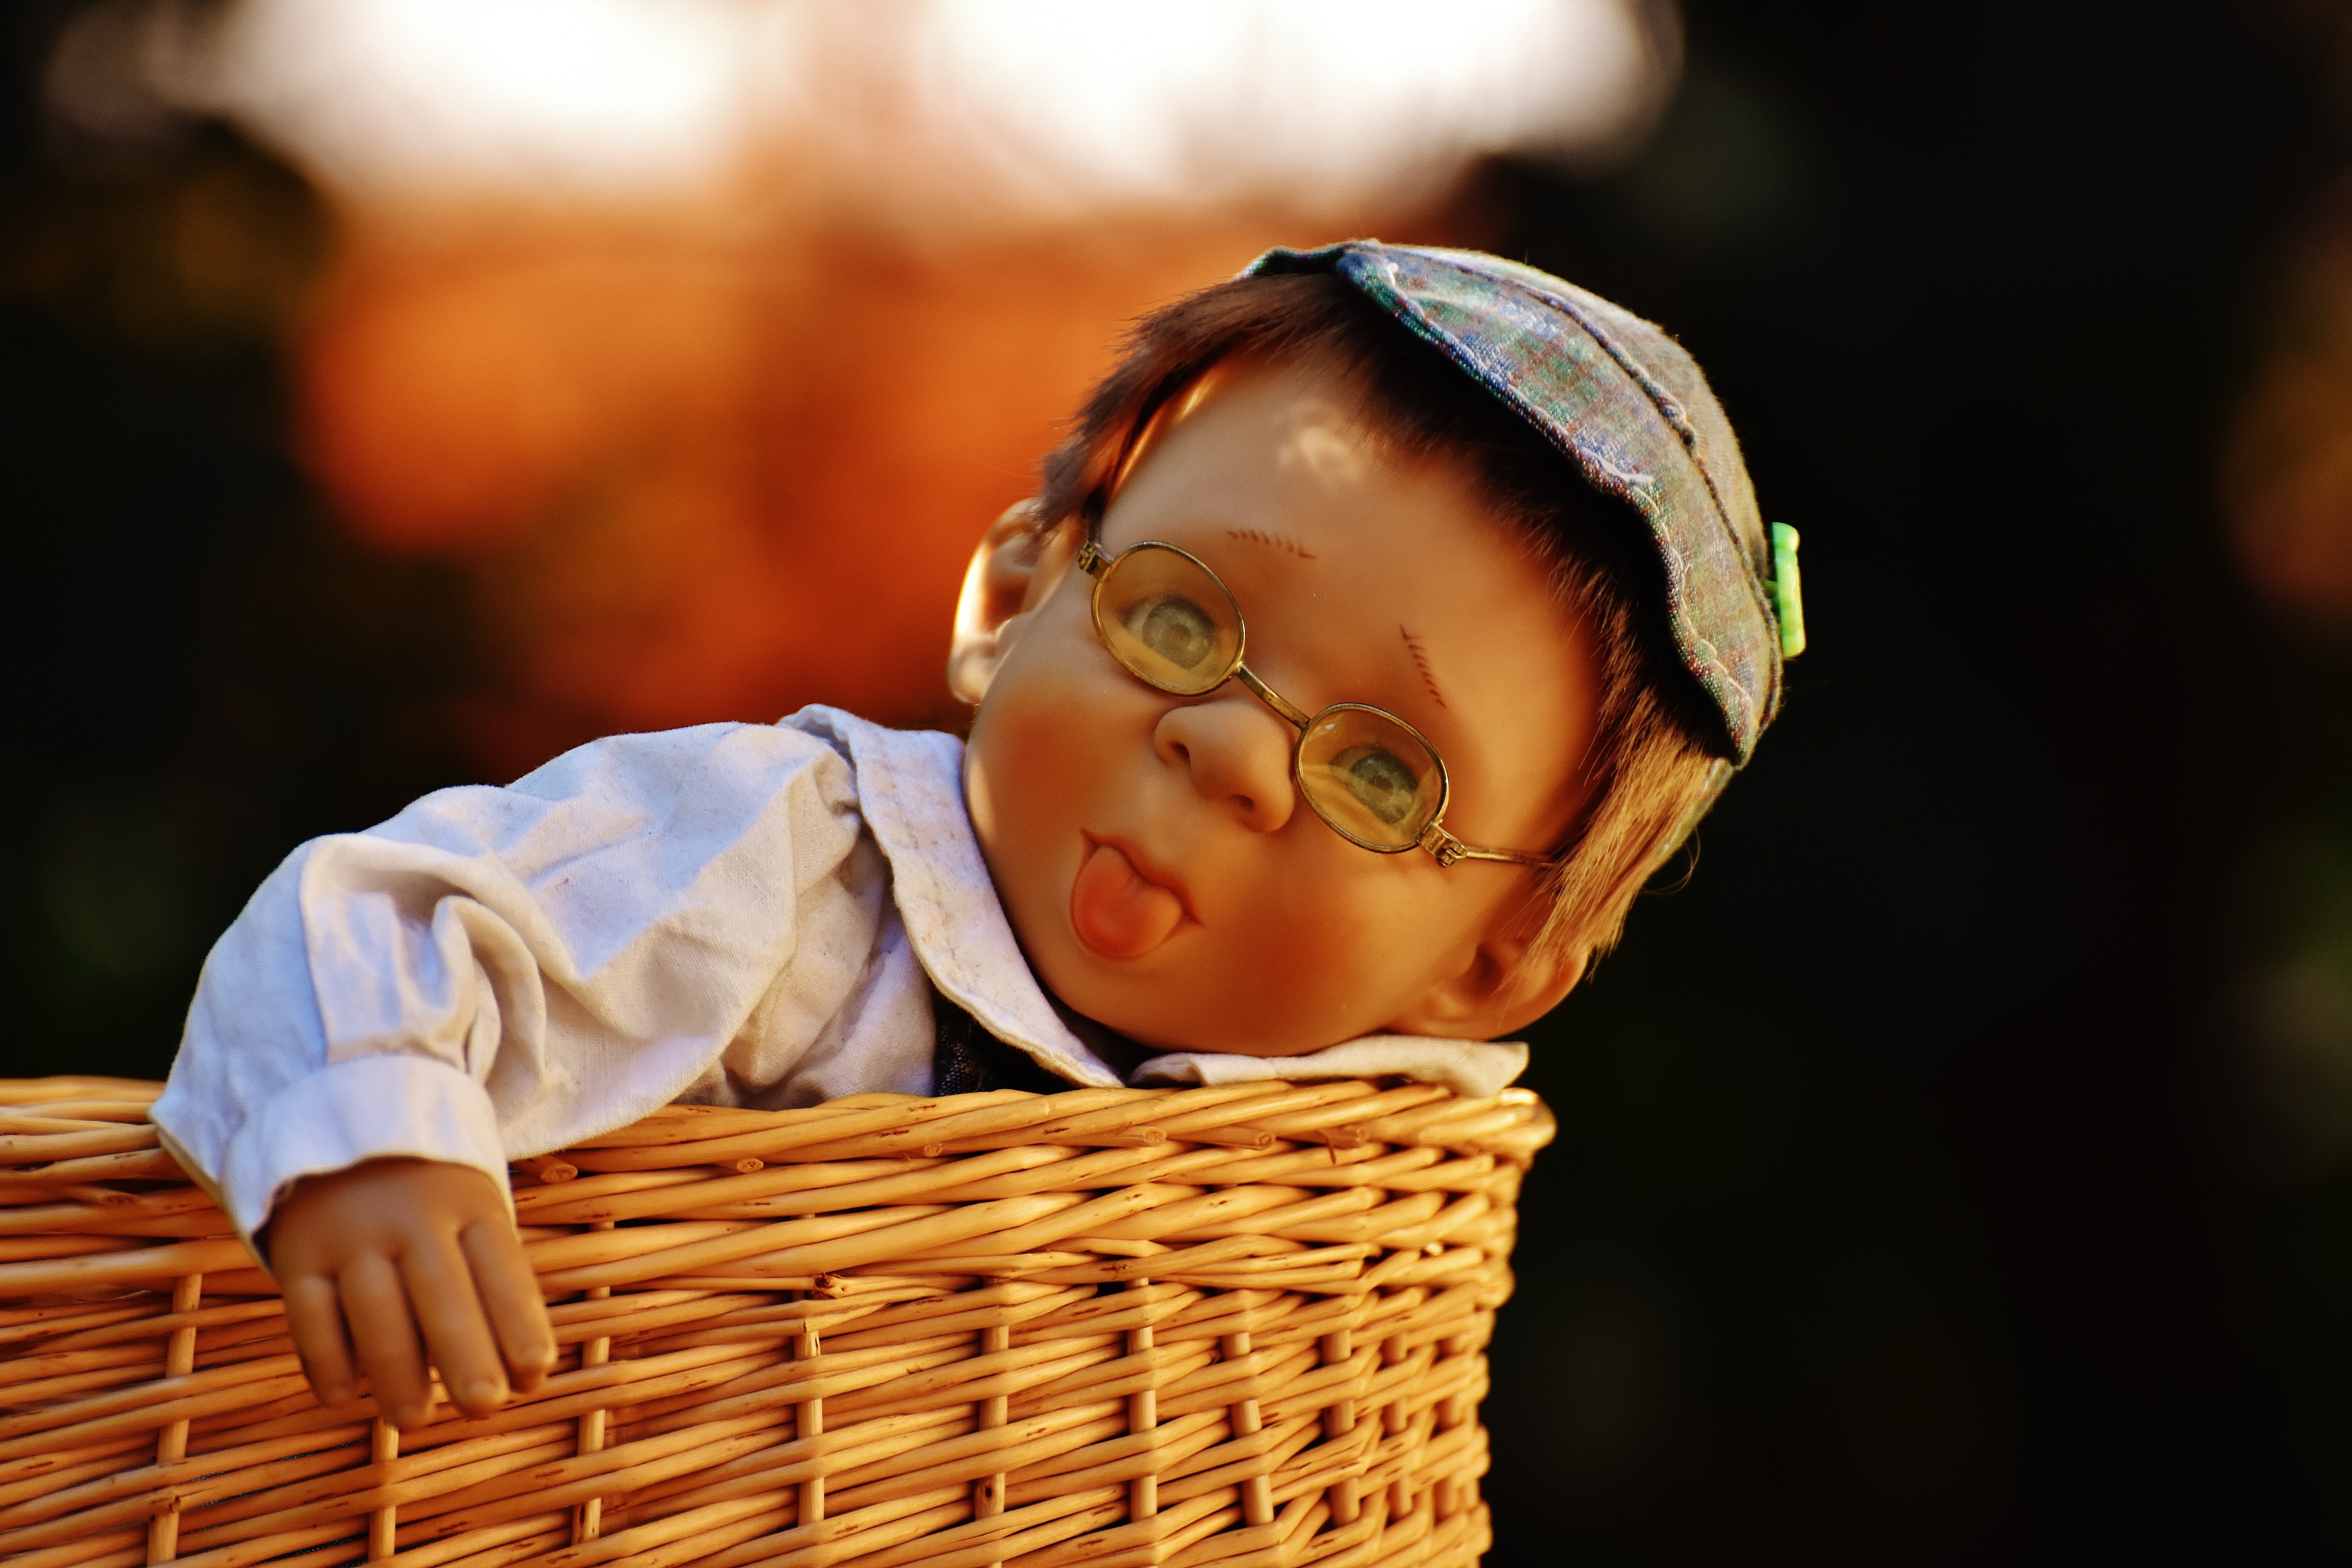 Baby Boy Doll In White Long Sleeve Shirt Wearing Cap - Photographers Images Dolls Boy , HD Wallpaper & Backgrounds